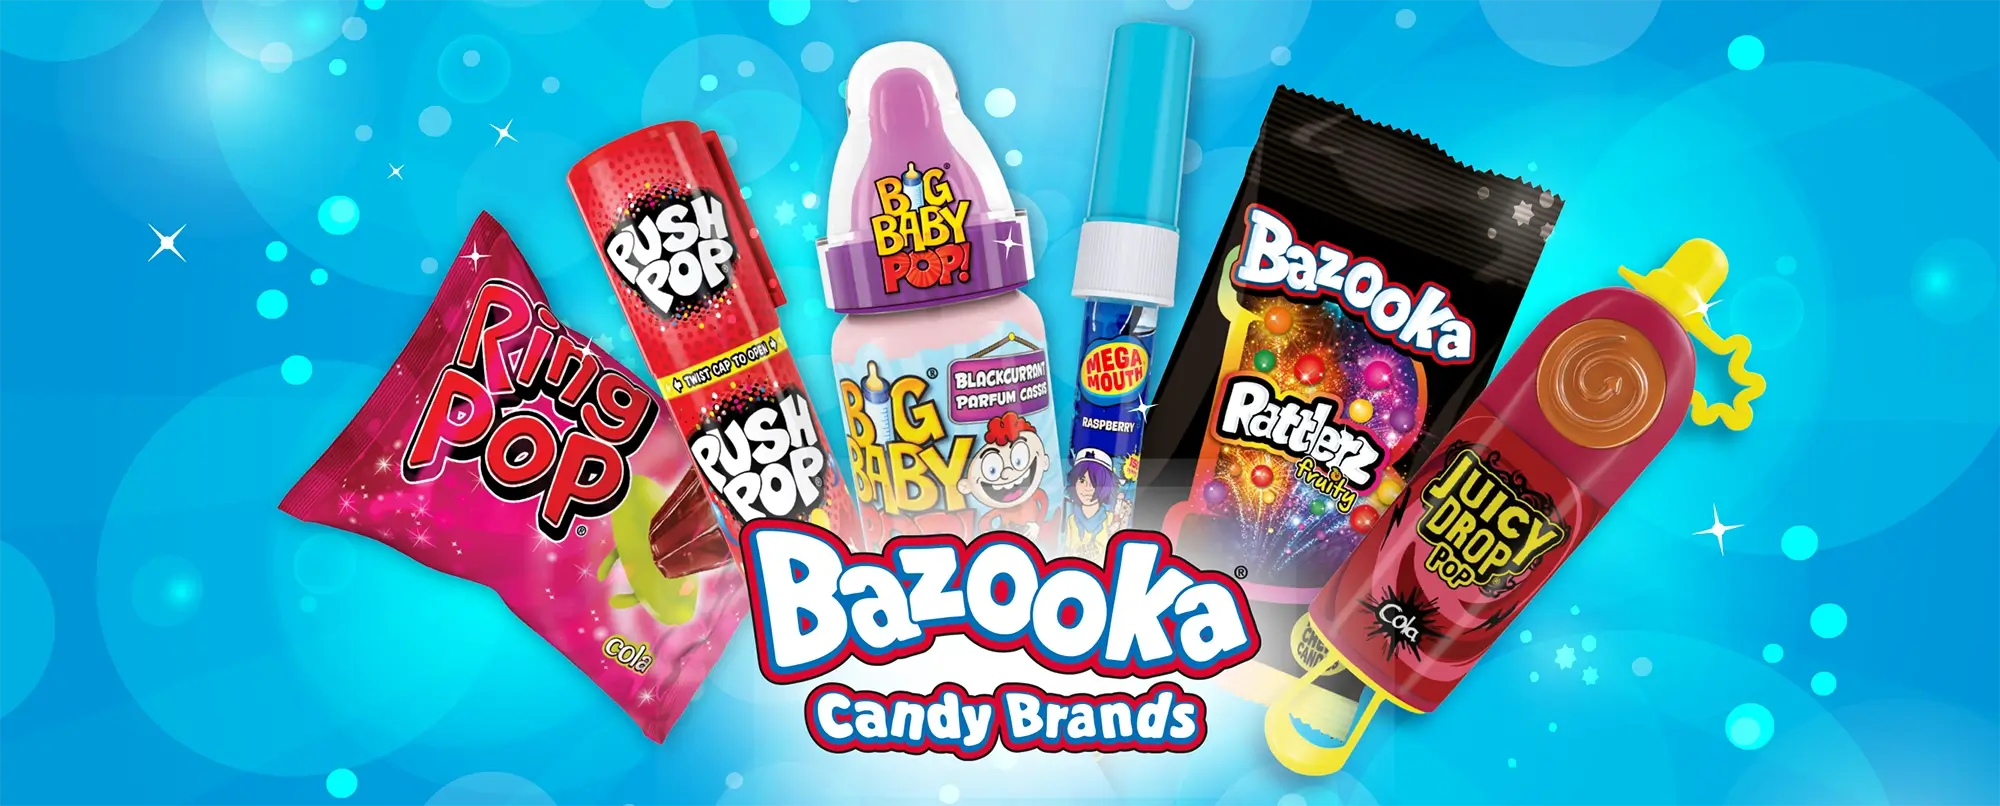 Apax Partners adquire a Bazooka Candy Brands